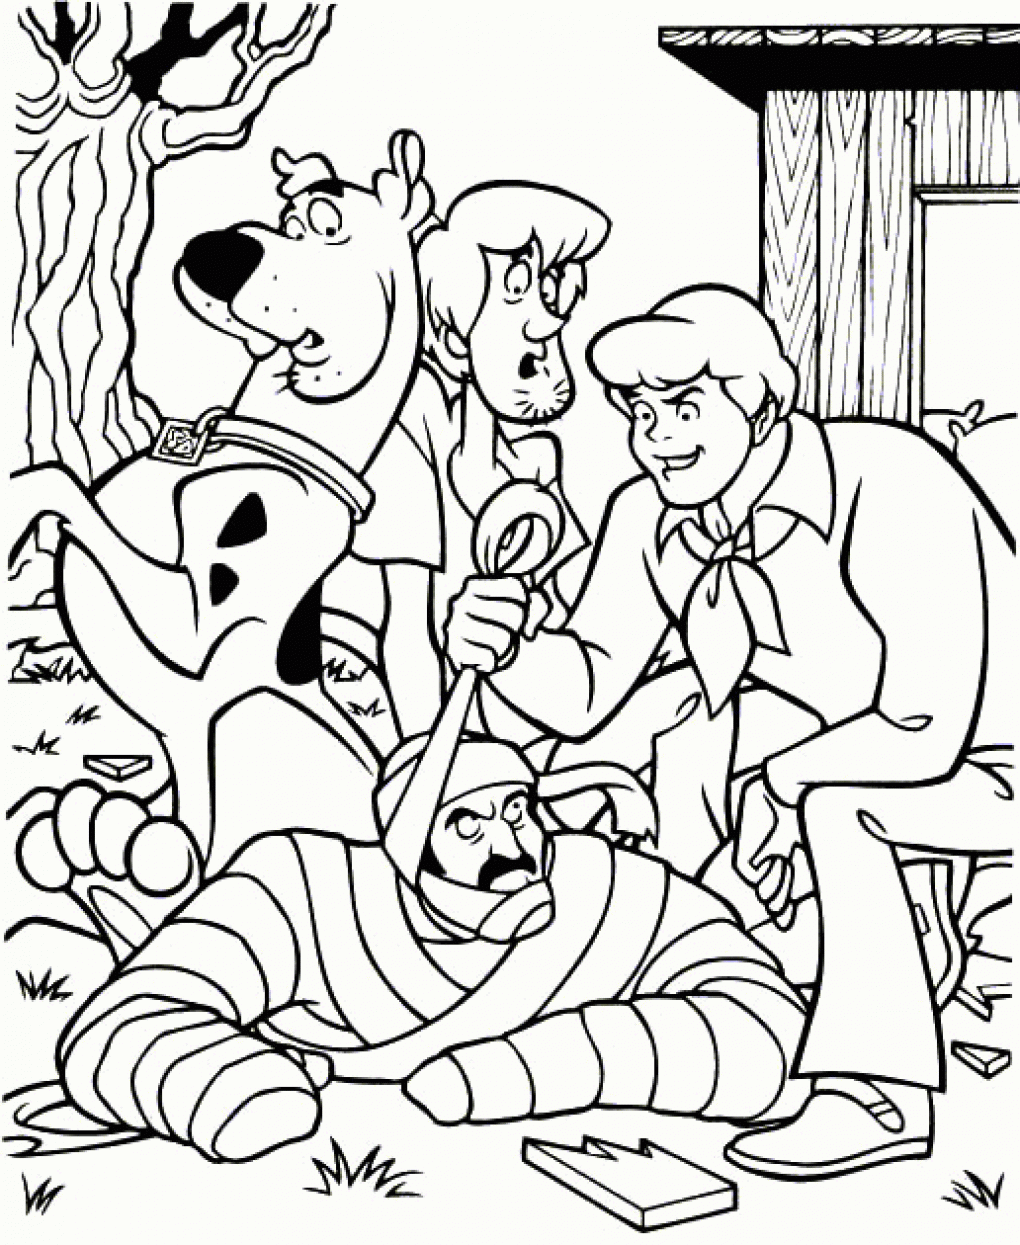 scooby doo movie coloring sheet